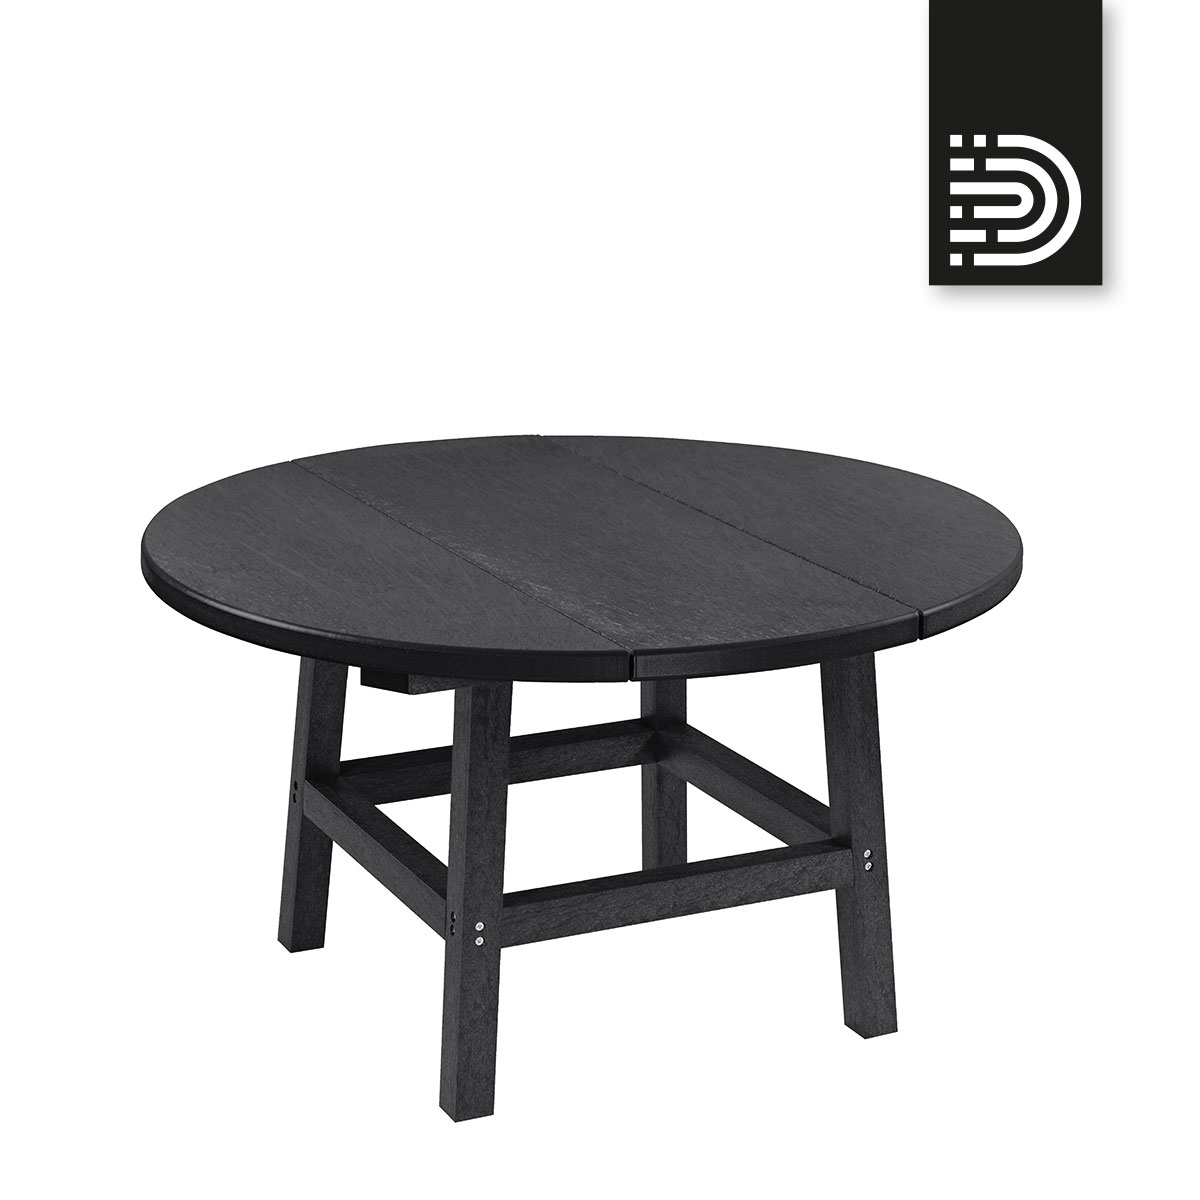 Cocktail Table in black 14 - TB01+TT03/02